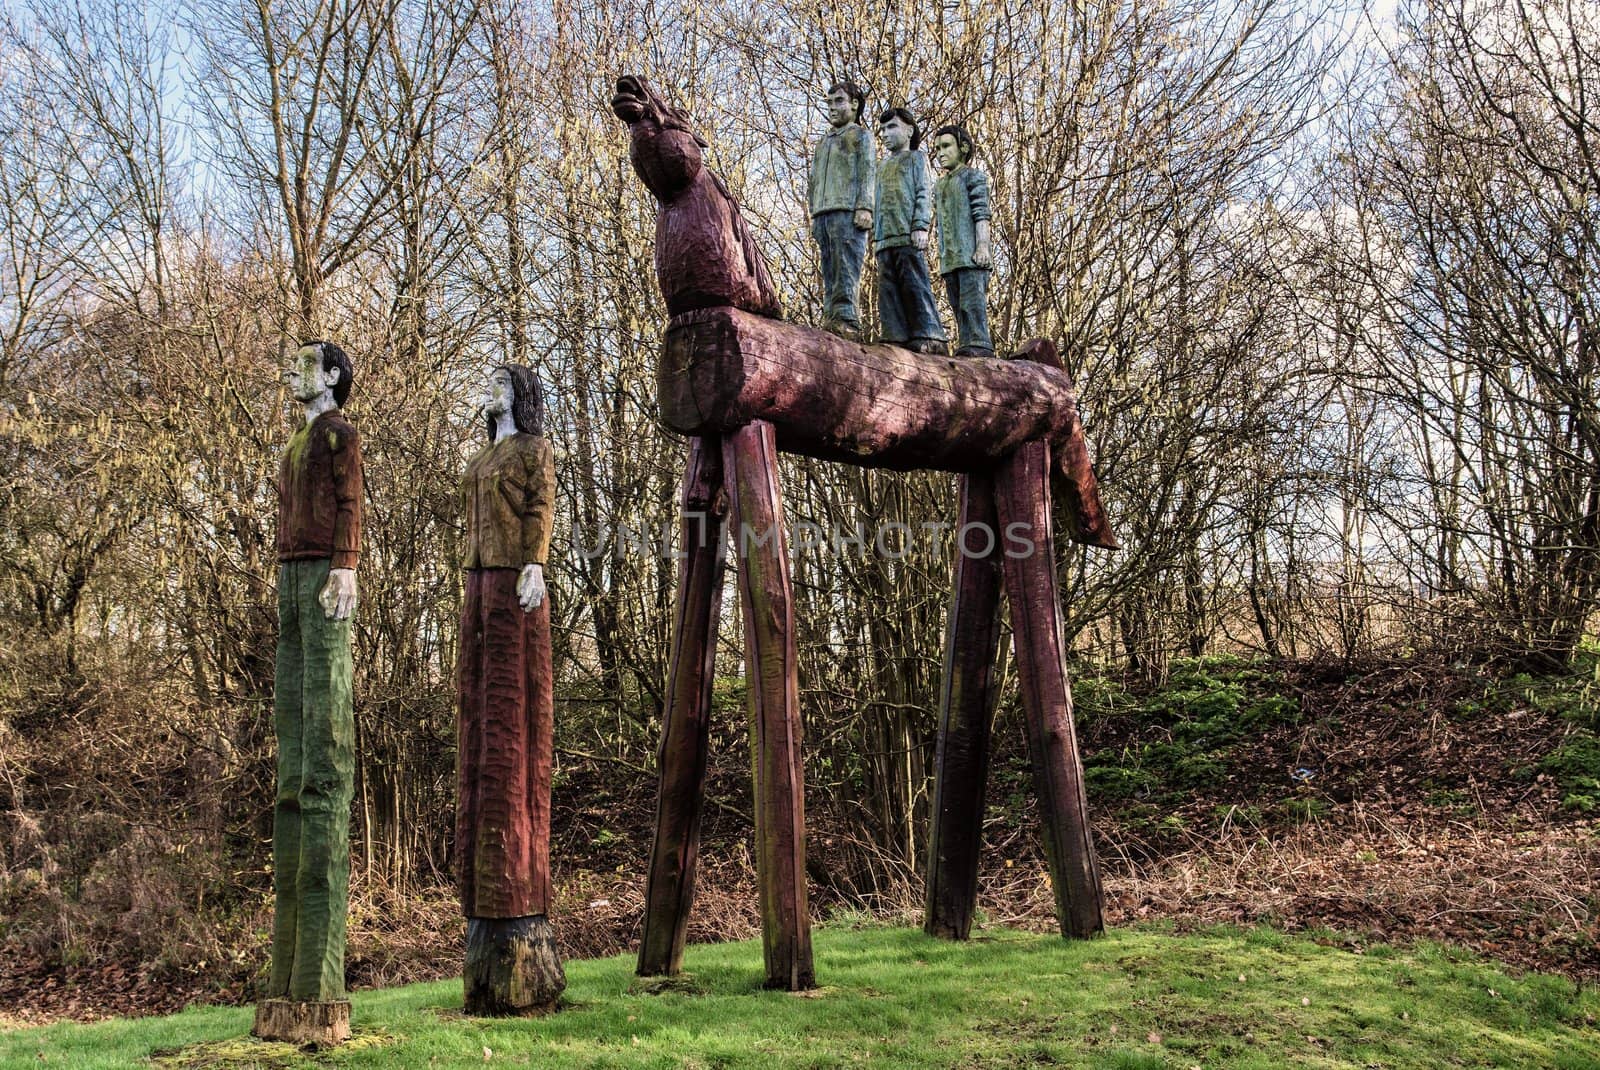 Carved wooden horse and people situated by the side of a main road in Ashford Kent